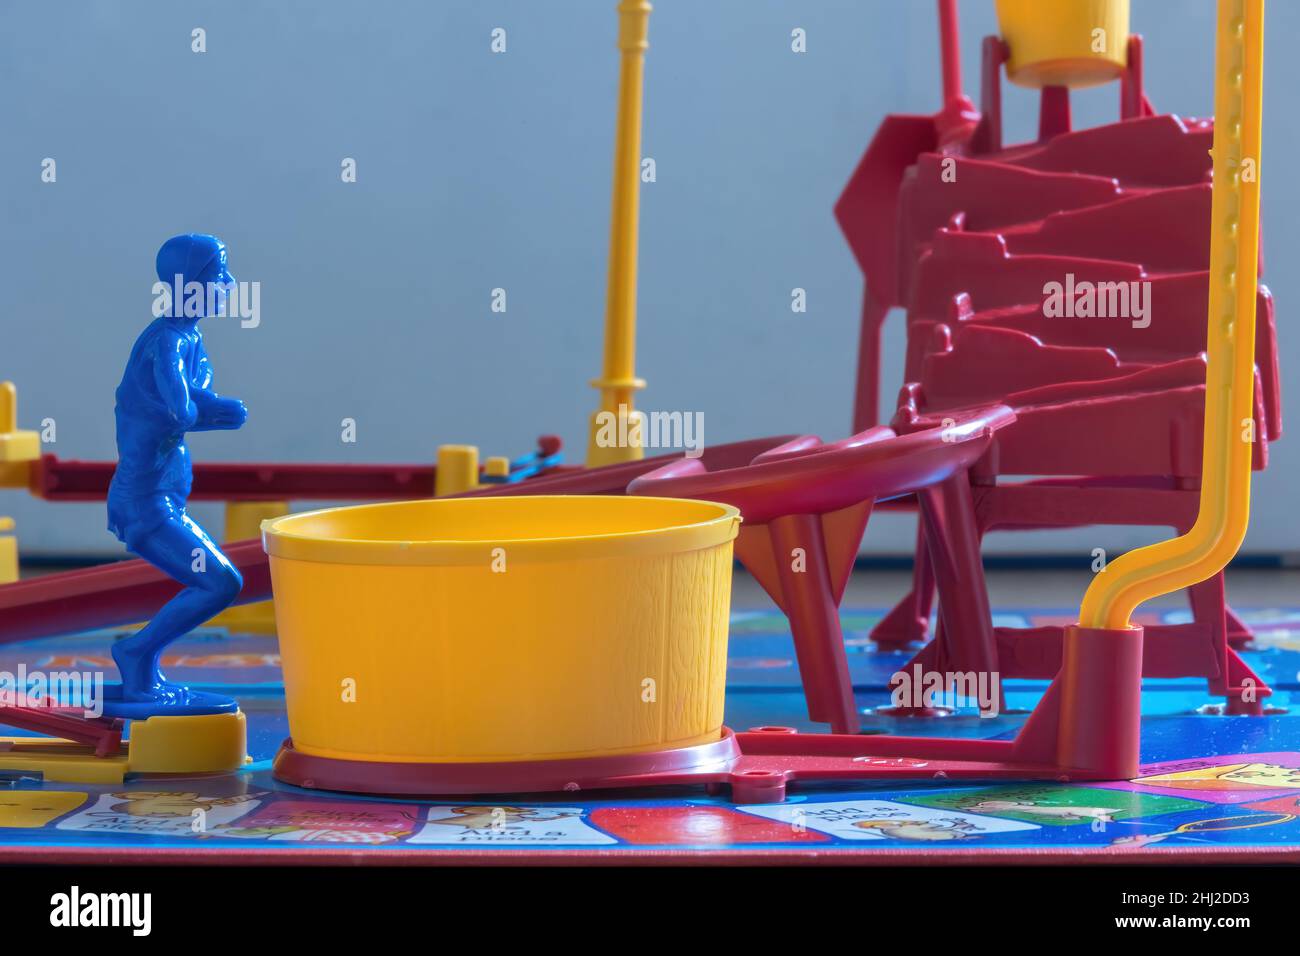 https://c8.alamy.com/comp/2HJ2DD3/close-up-image-of-the-diver-on-mouse-trap-board-game-ready-to-dive-into-the-yellow-pool-which-sets-of-the-mouse-trap-2HJ2DD3.jpg